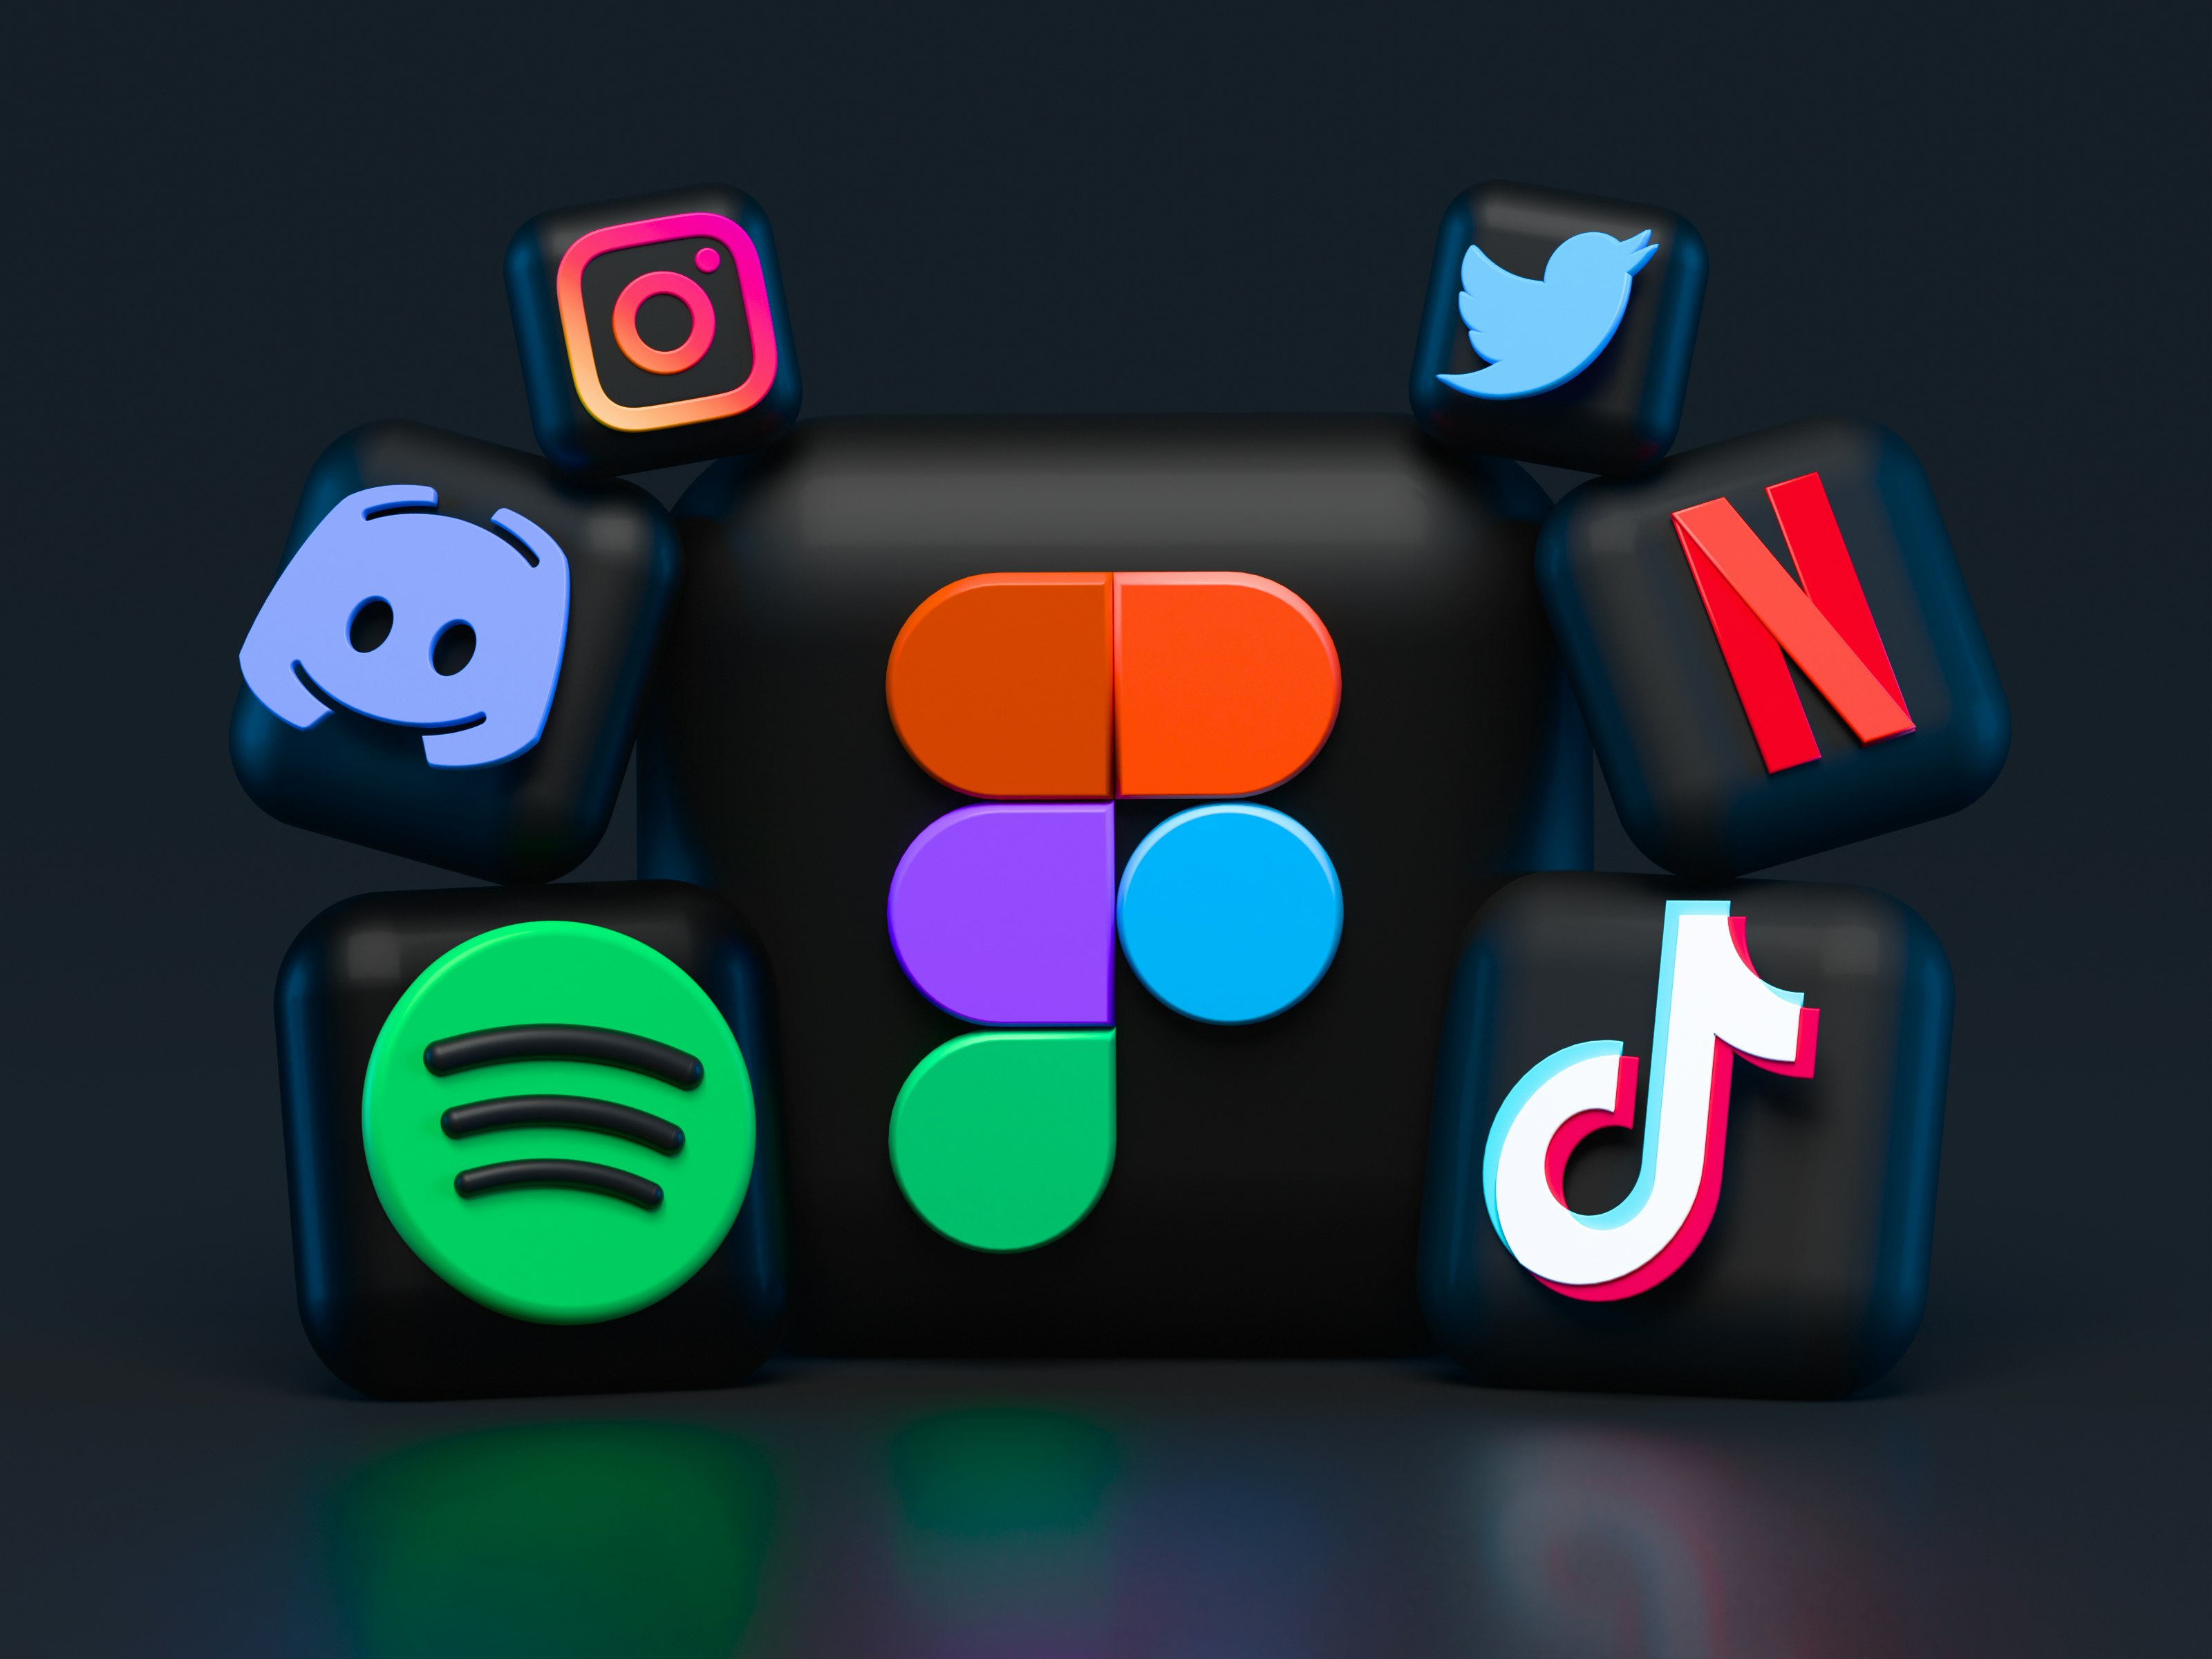 My favorite apps